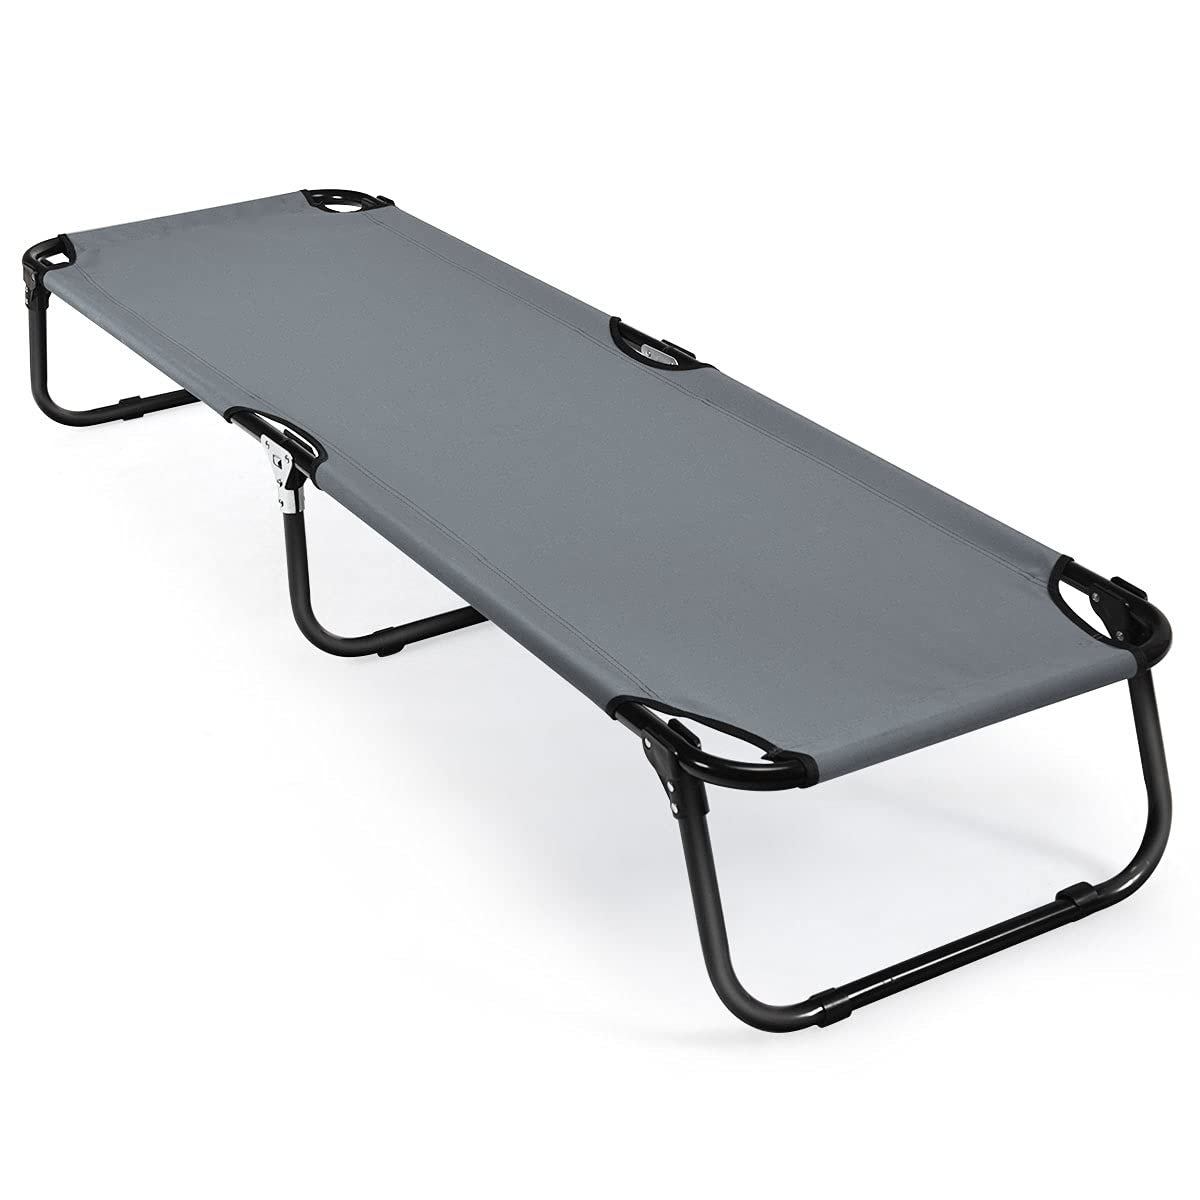 Giantex  Light Weight Camping Bed for Camp Office Sleepover